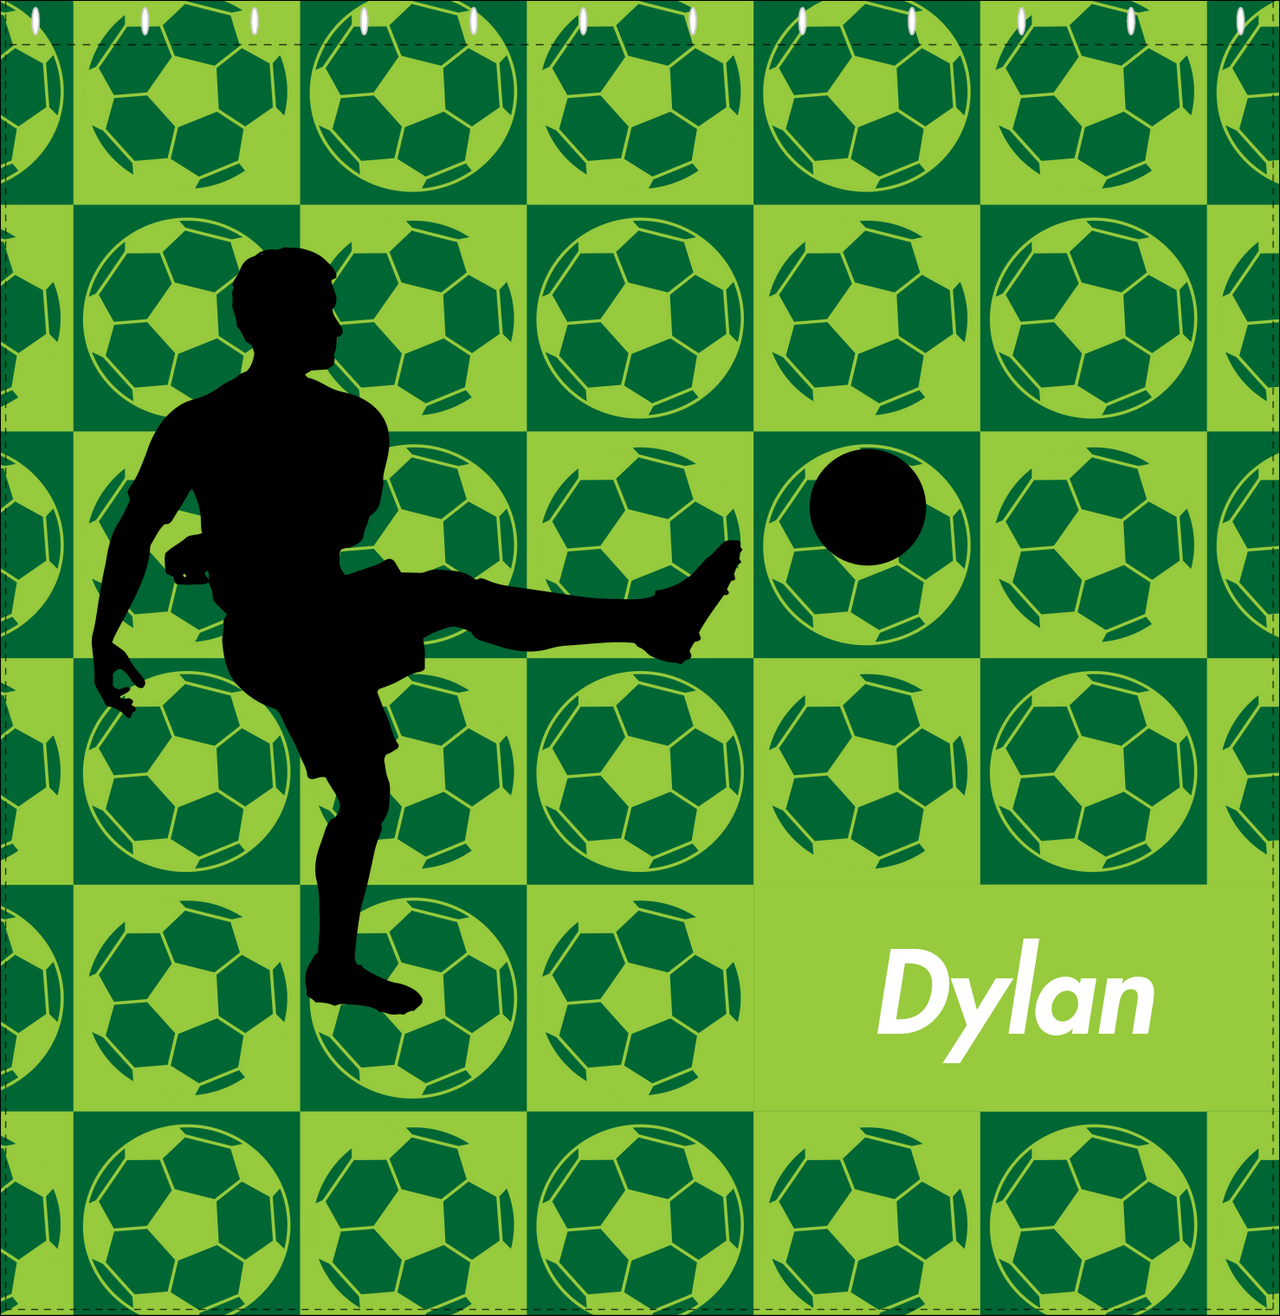 Personalized Soccer Shower Curtain XLVI - Green Background - Boy Silhouette II - Decorate View